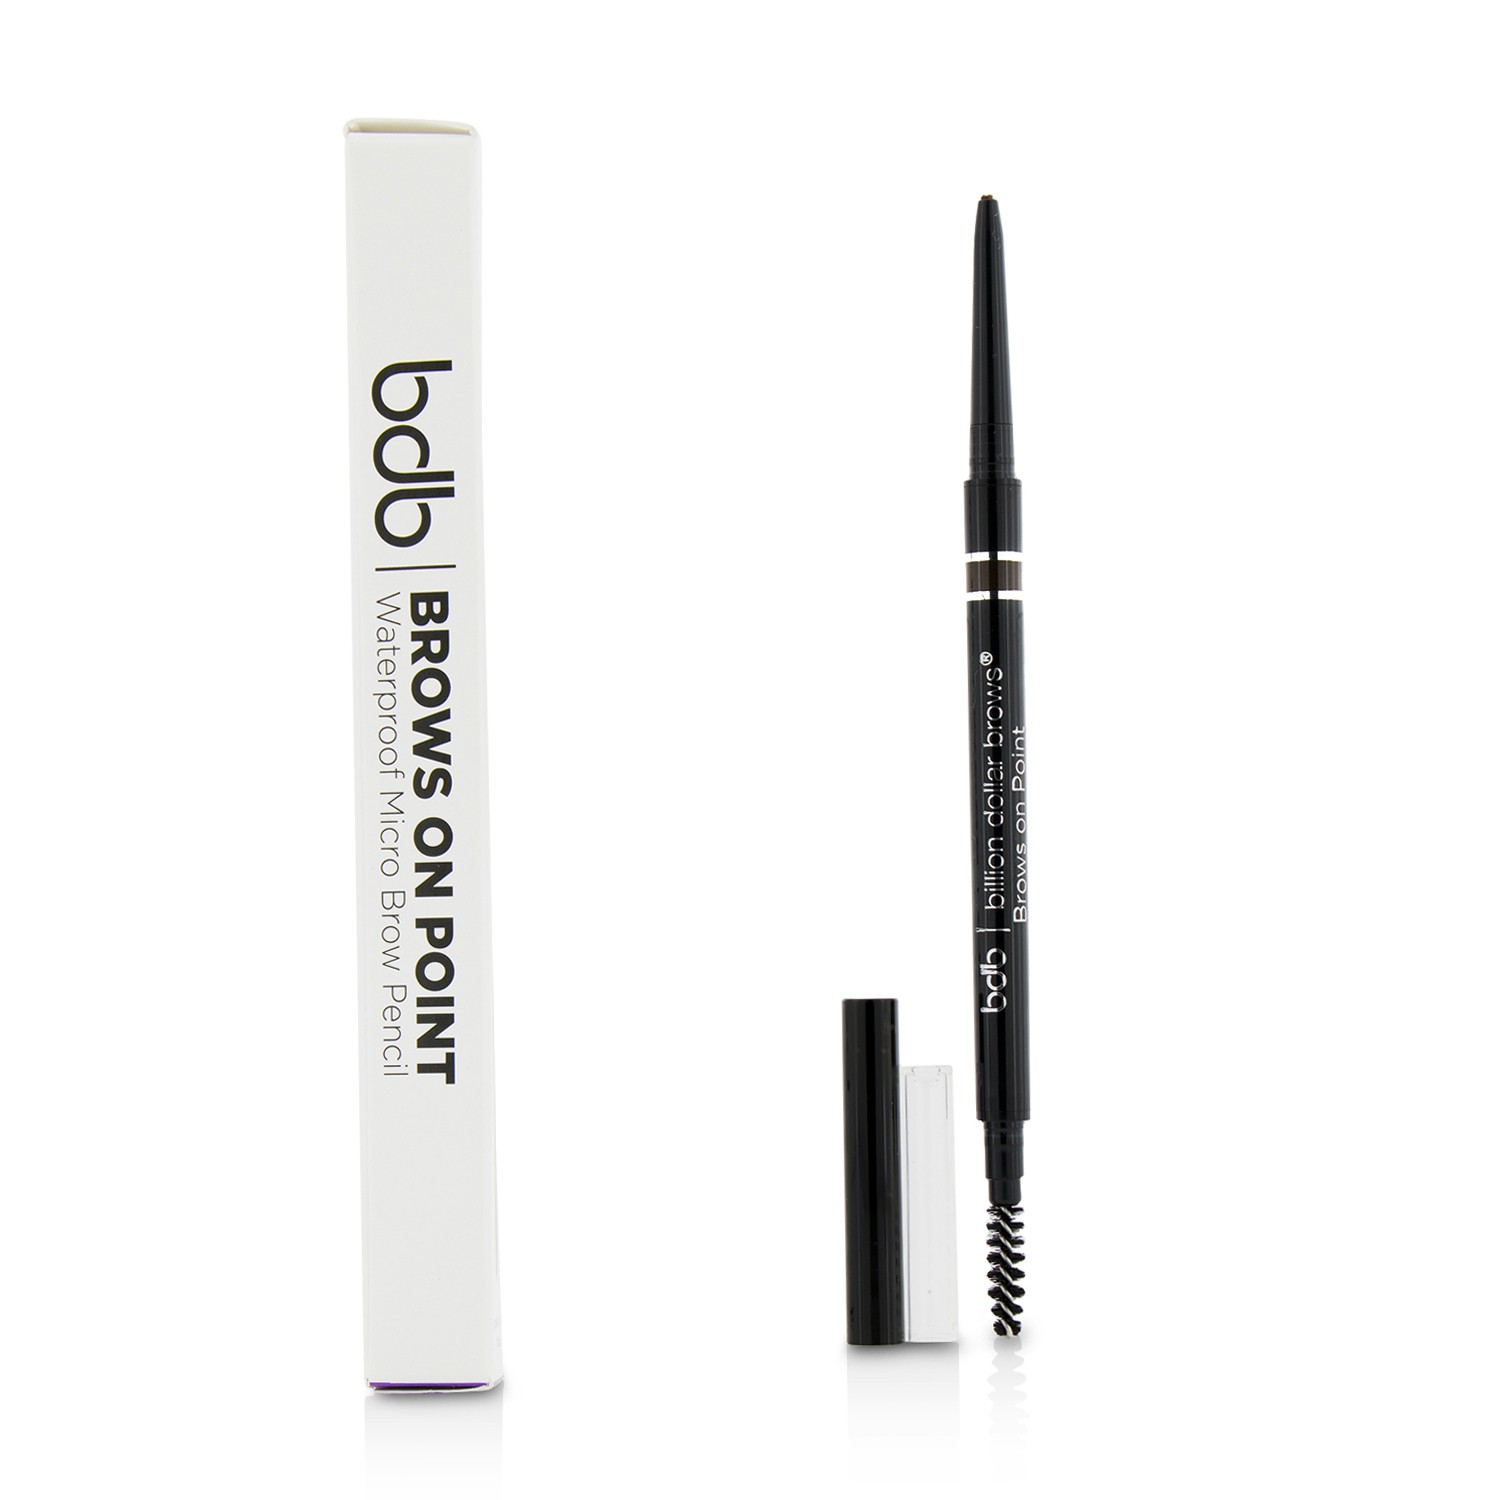 Brows On Point Waterproof Micro Brow Pencil - Taupe Billion Dollar Brows Image